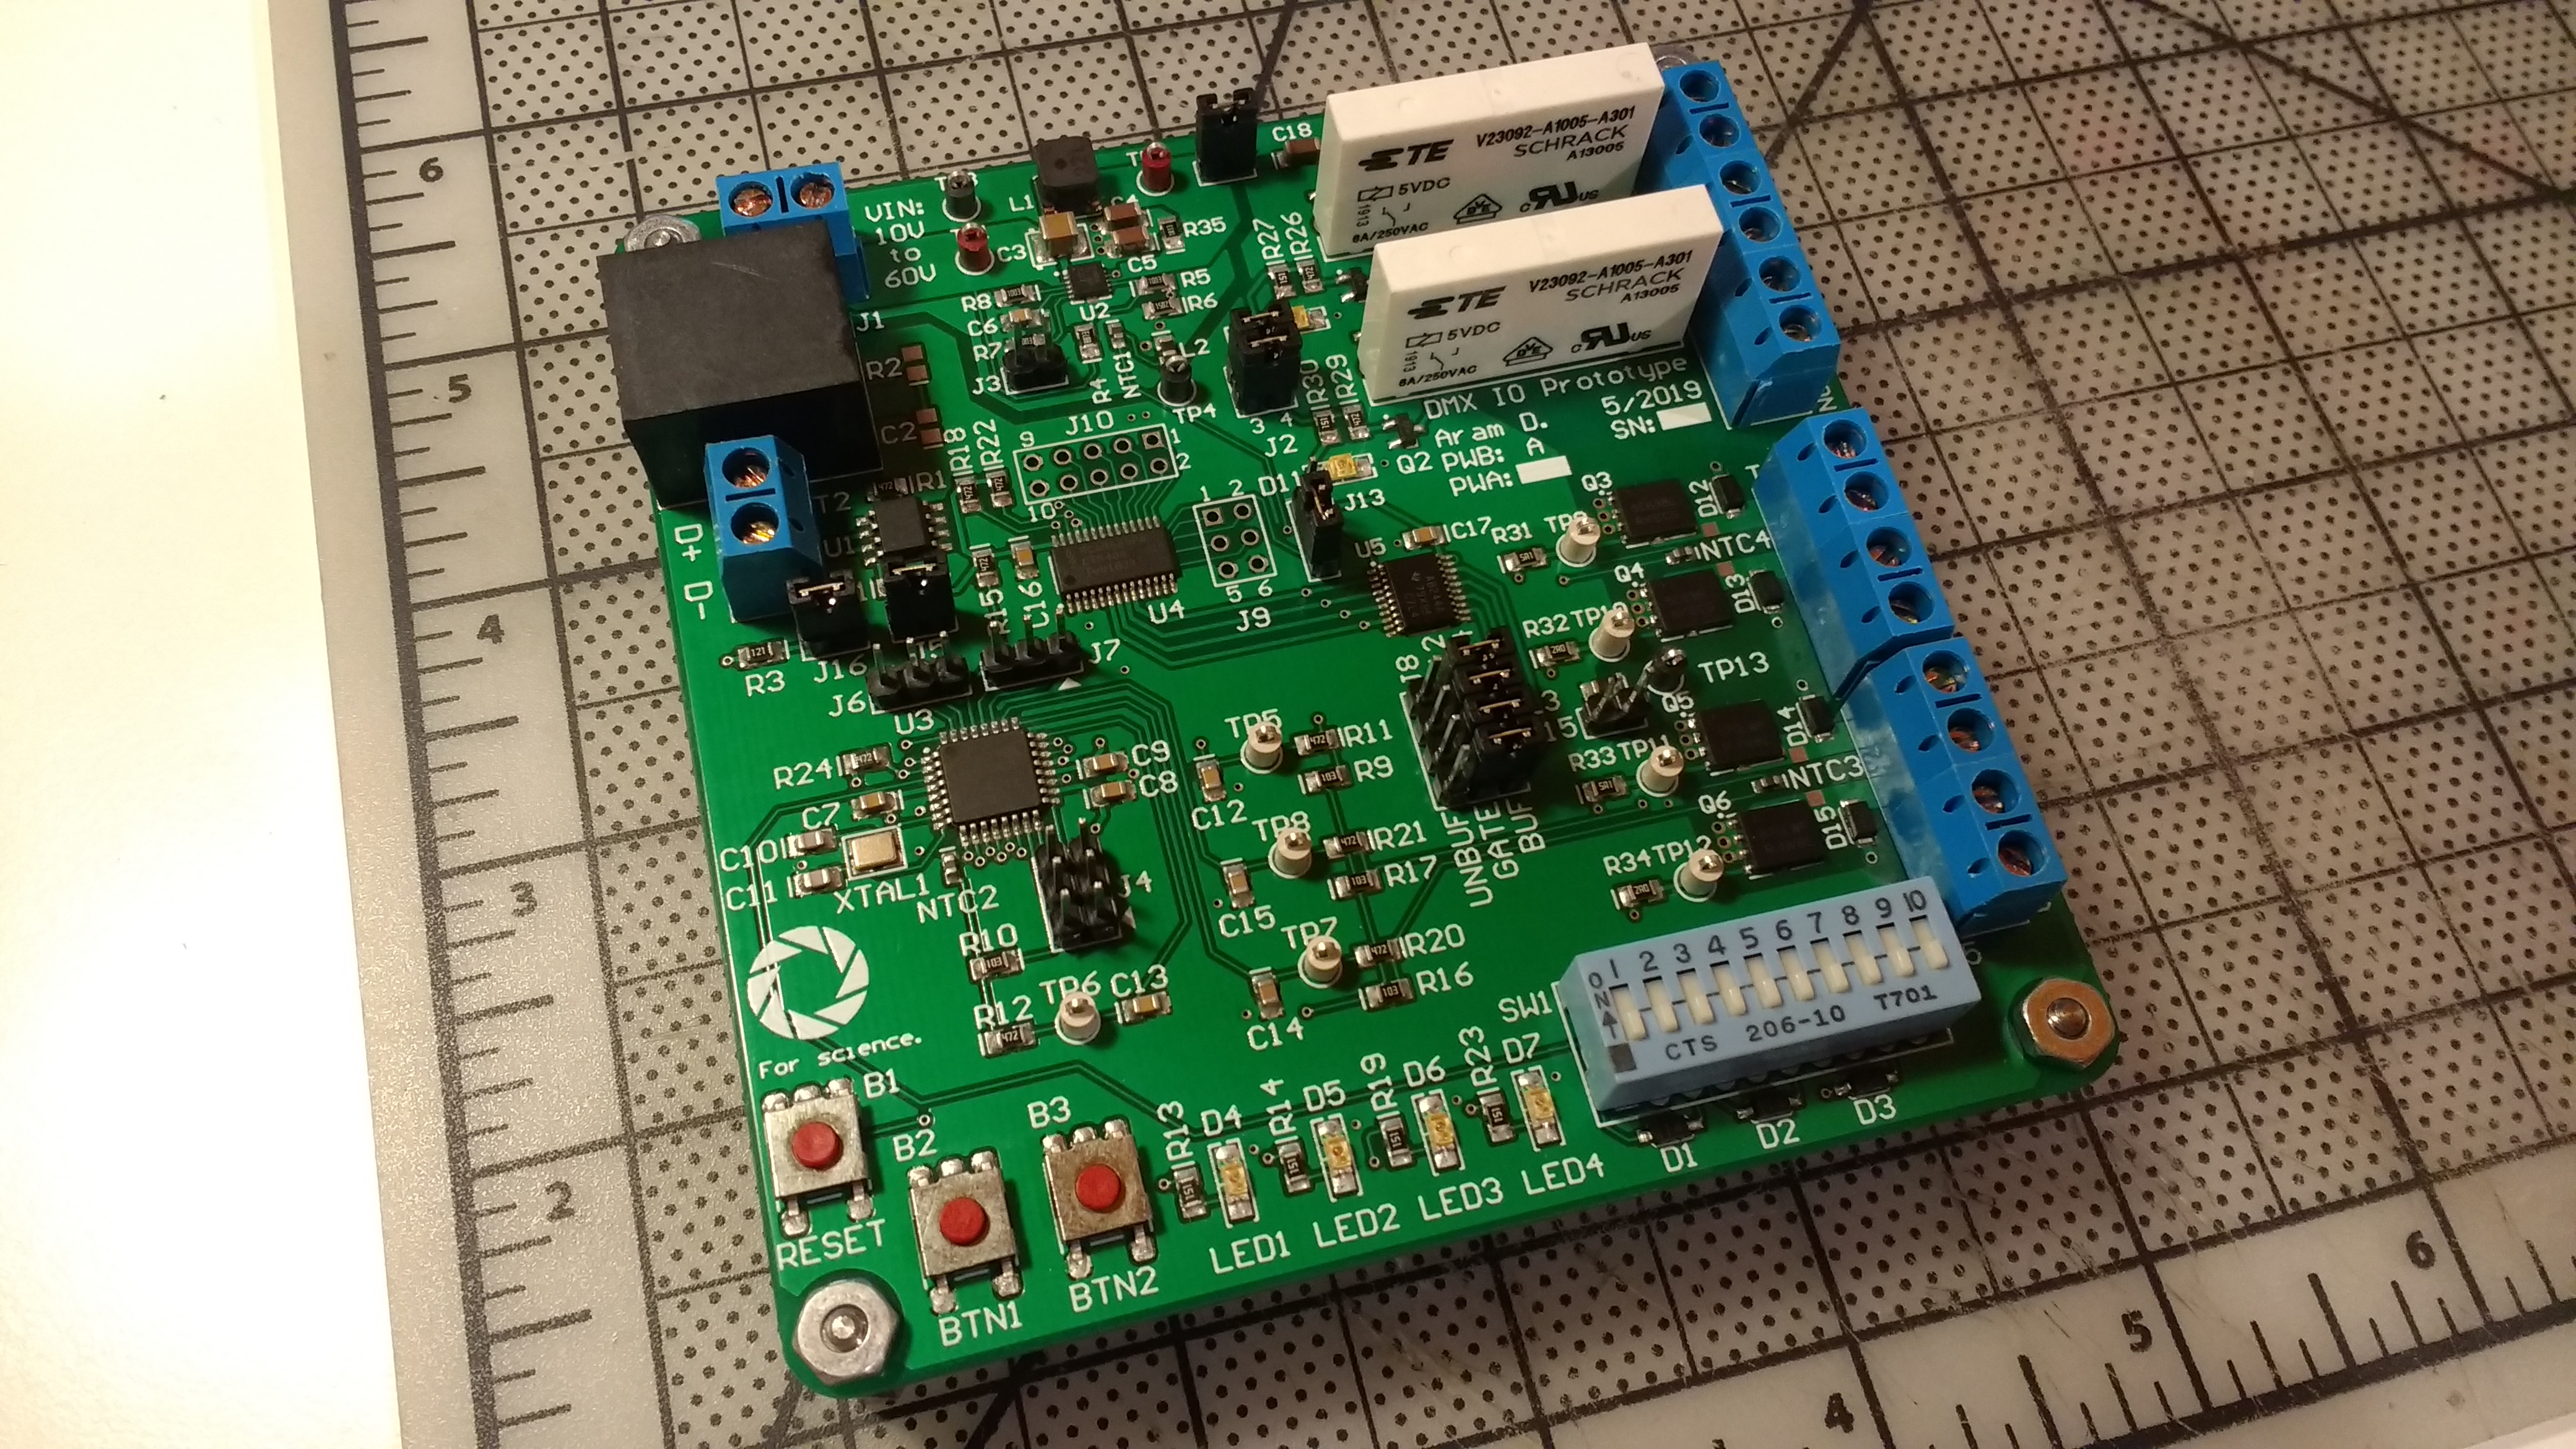 The DMX development board - a printed circuit board assembly